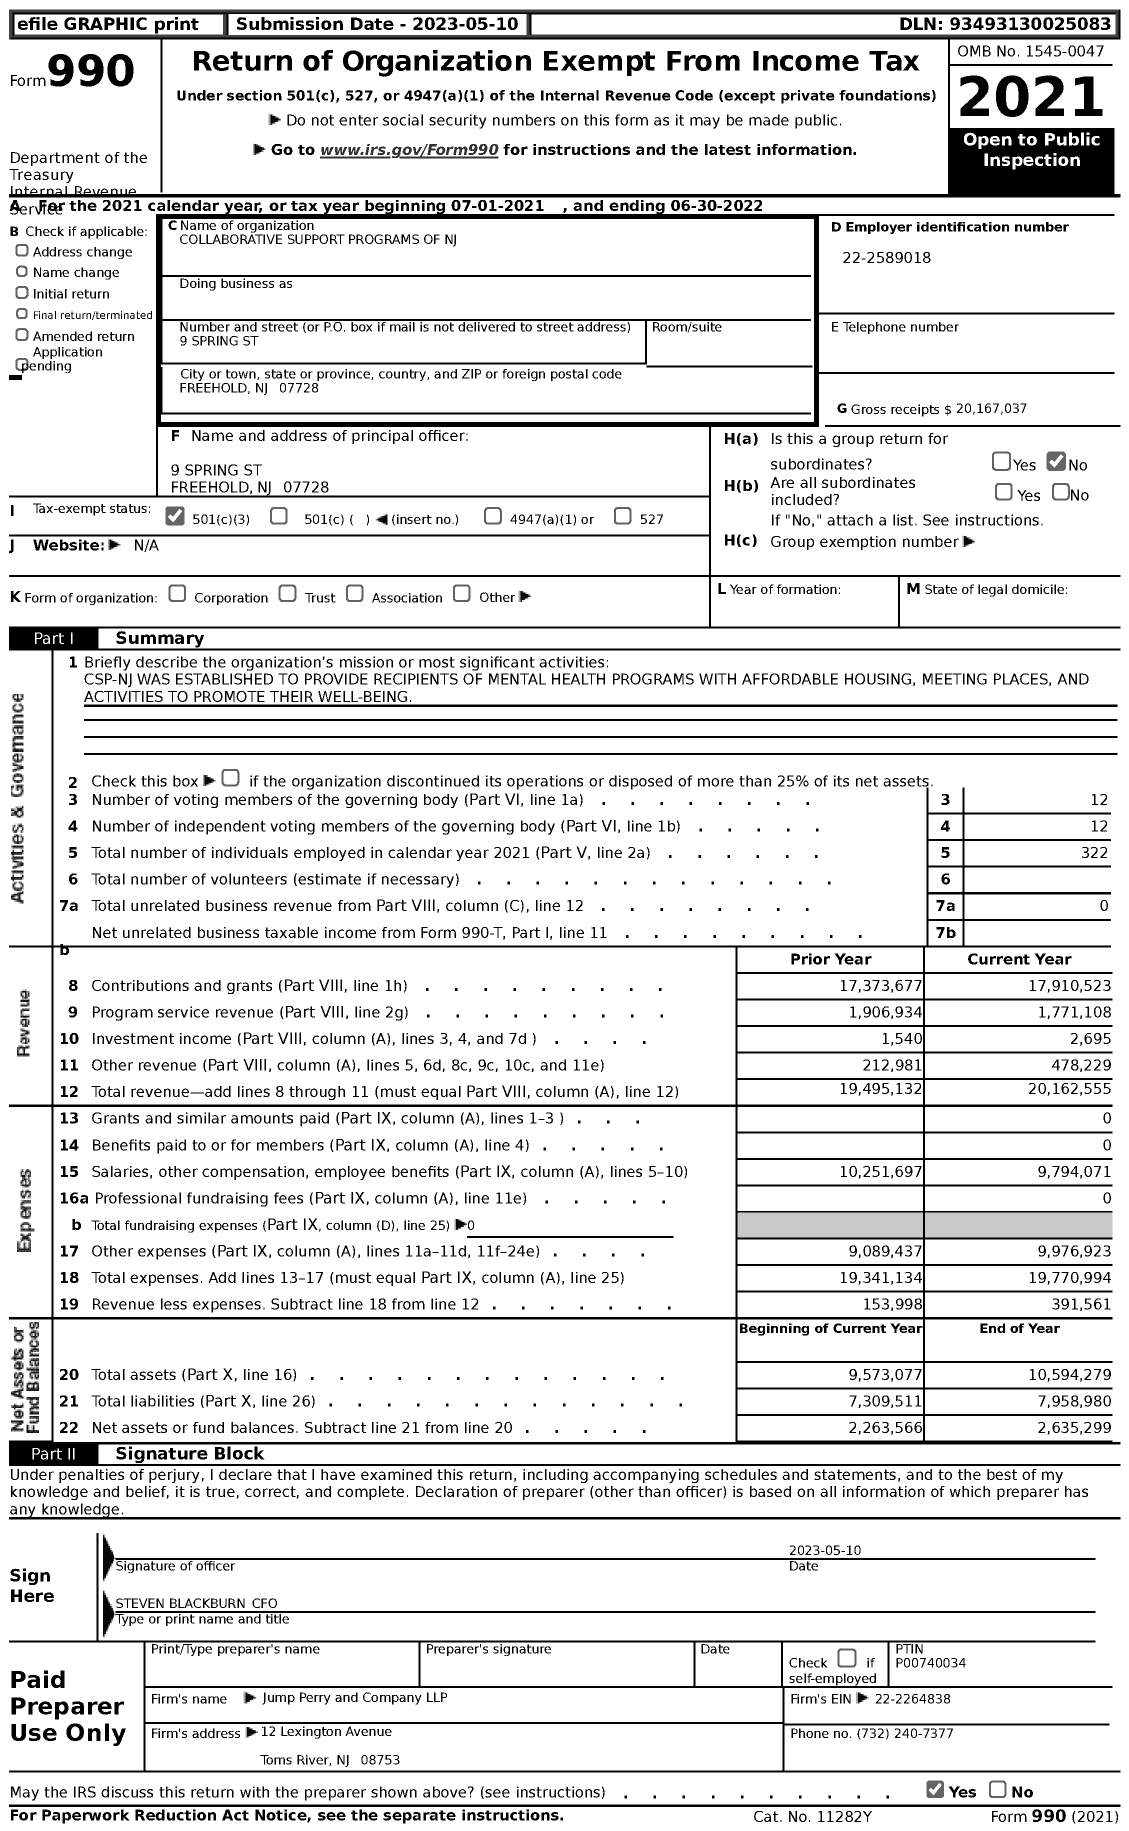 Image of first page of 2021 Form 990 for Collaborative Support Programs of New Jersey (CSPNJ)